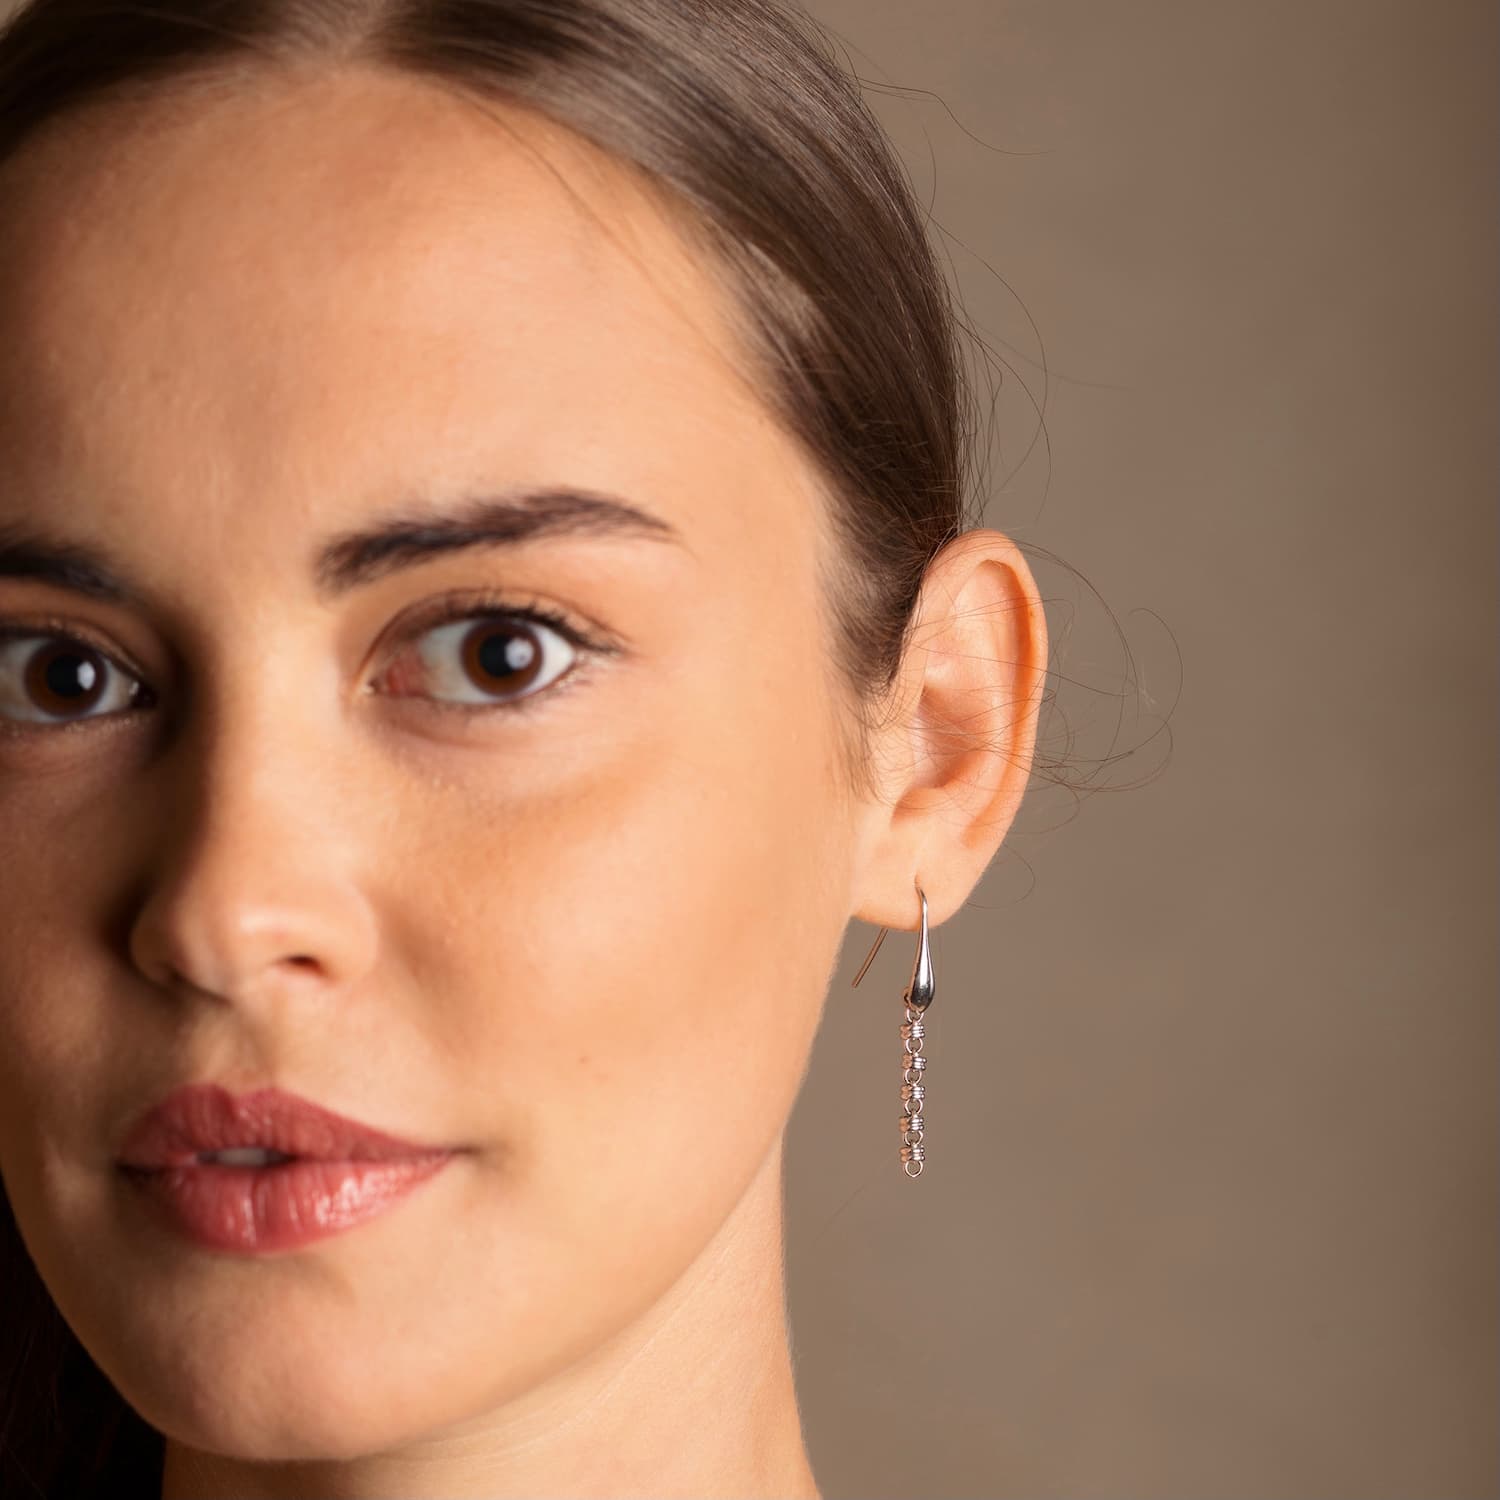 A closeup of a model wearing long silver chain earrings designed and hand-crafted by DelBrenna Italian Jewelers in Tuscany. The earrings are designed based on the iconic Links collection of DelBrenna silver chains, necklaces, rings, and bracelets.